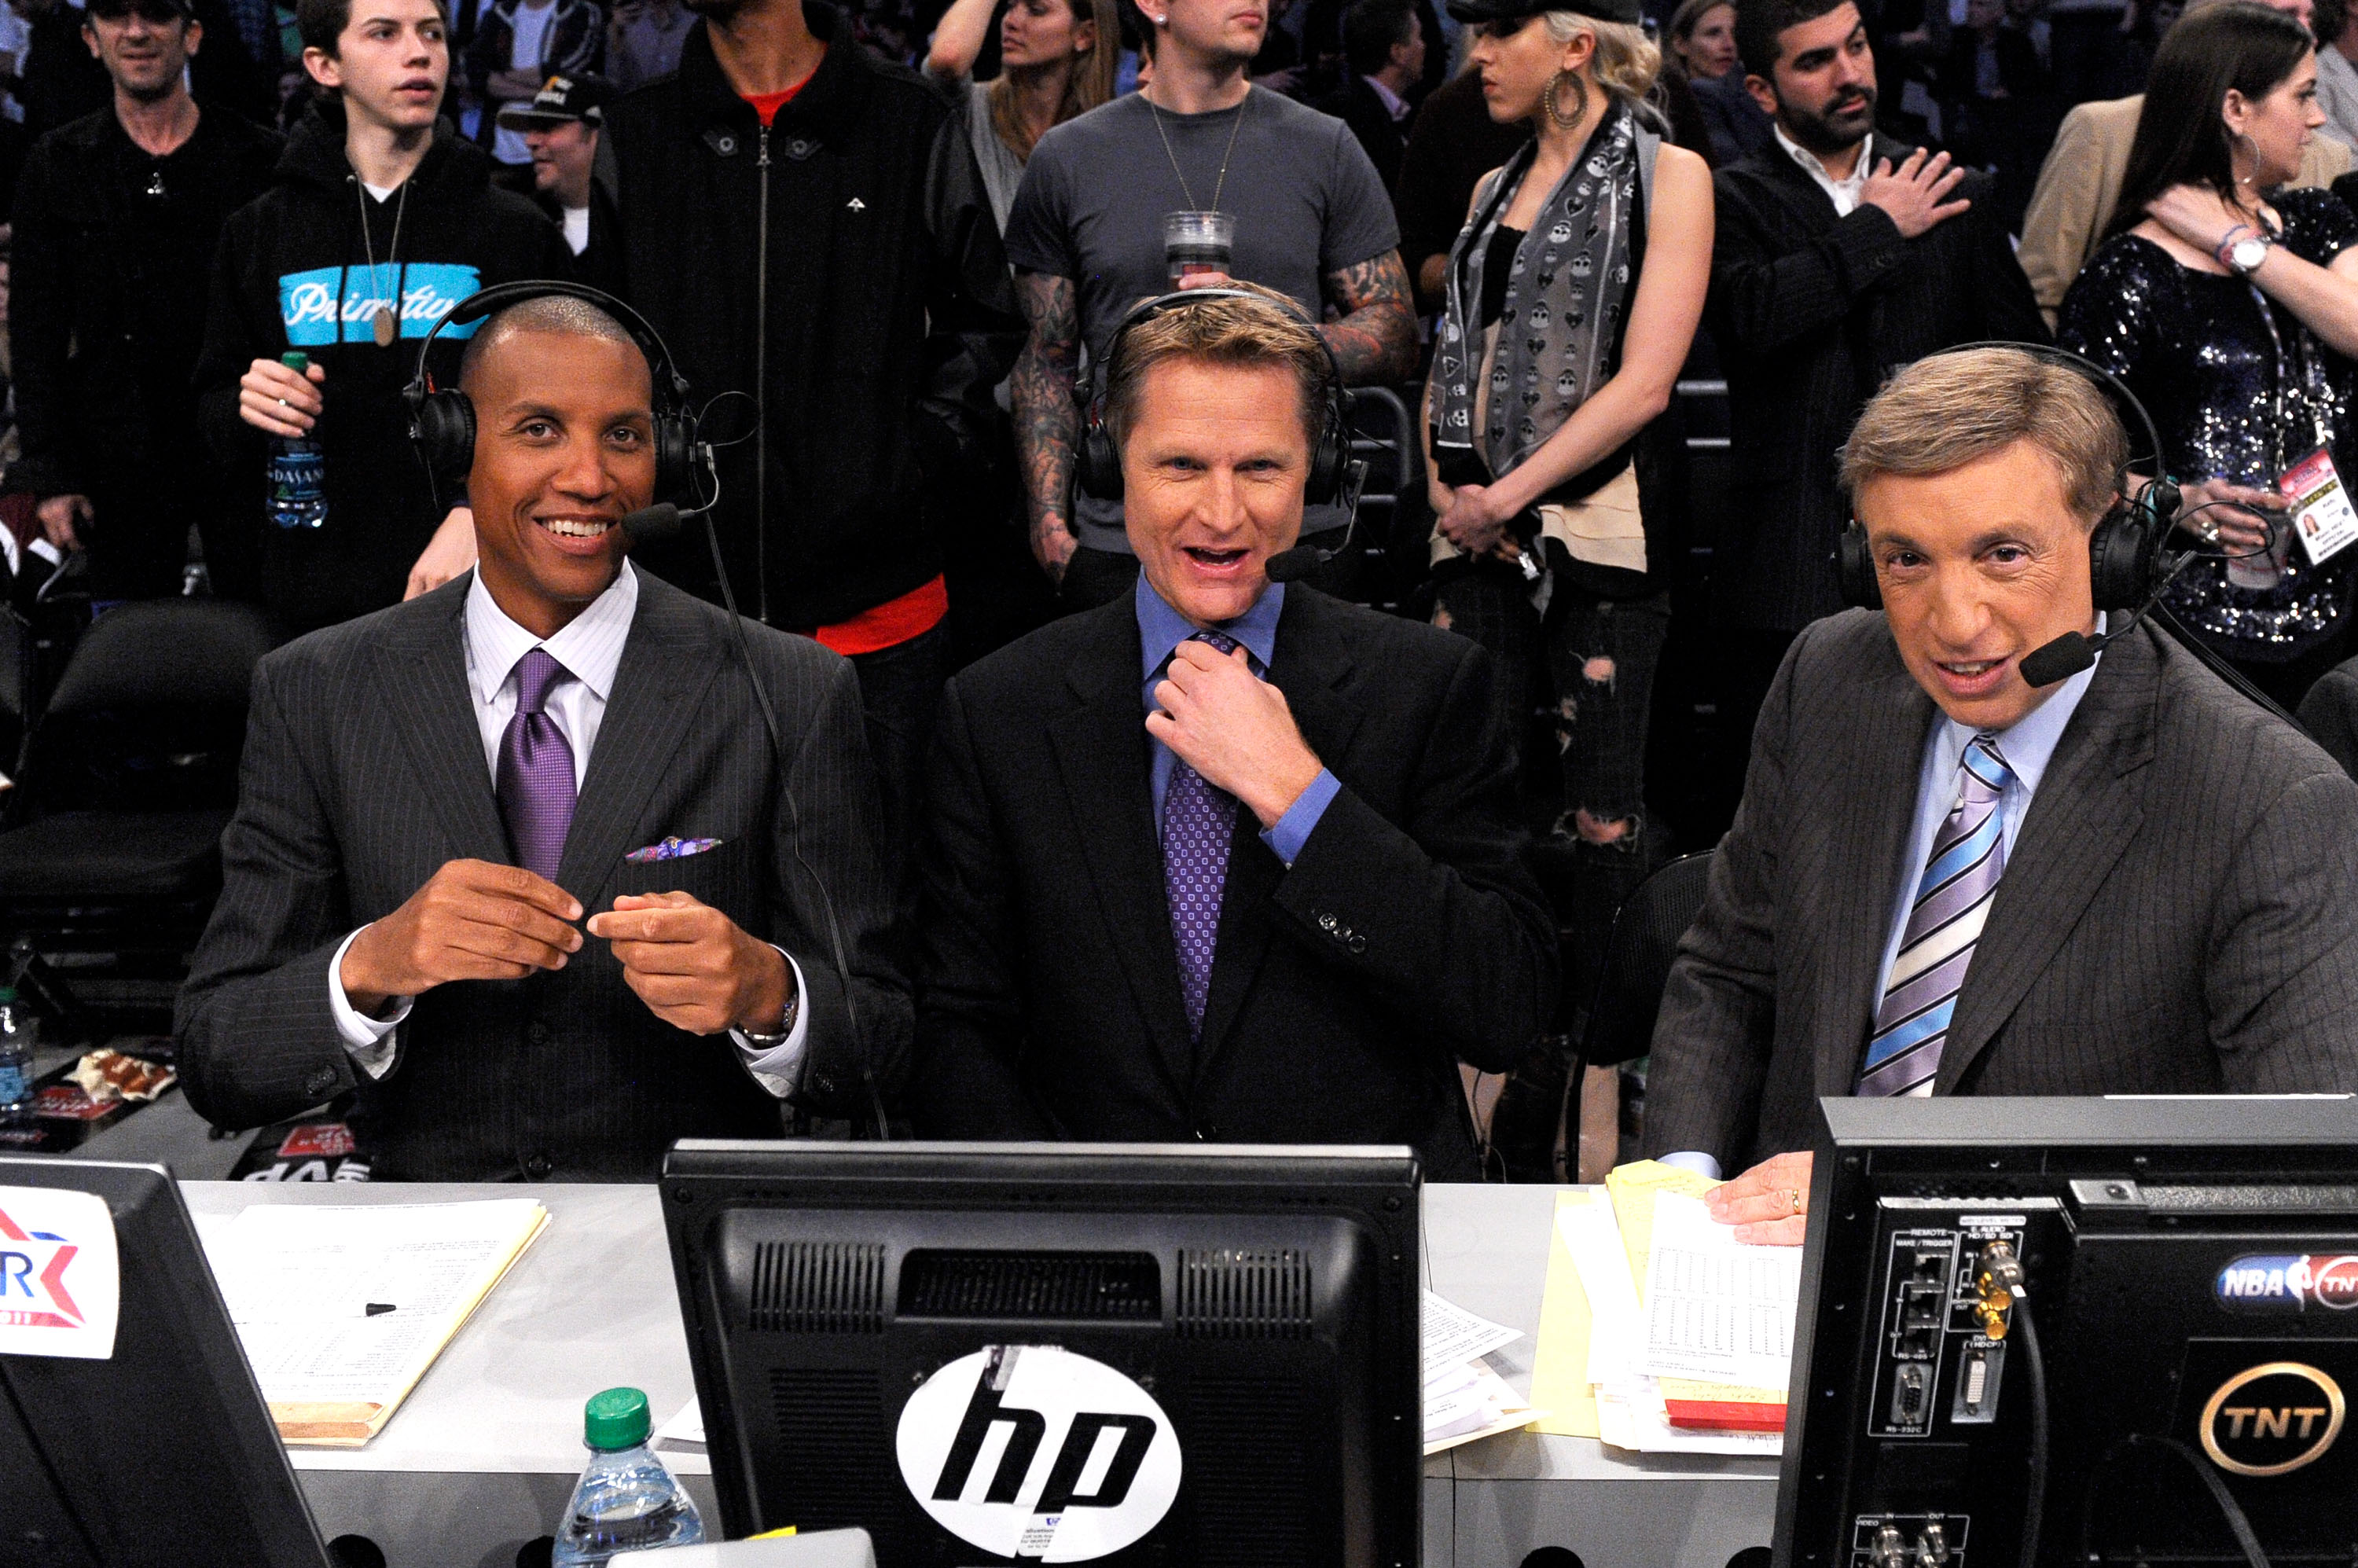 LOS ANGELES, CA - FEBRUARY 20:  Reggie Miller, Steve Kerr and Marv Albert of TNT in the 2011 NBA All-Star Game at Staples Center on February 20, 2011 in Los Angeles, California. NOTE TO USER: User expressly acknowledges and agrees that, by downloading and